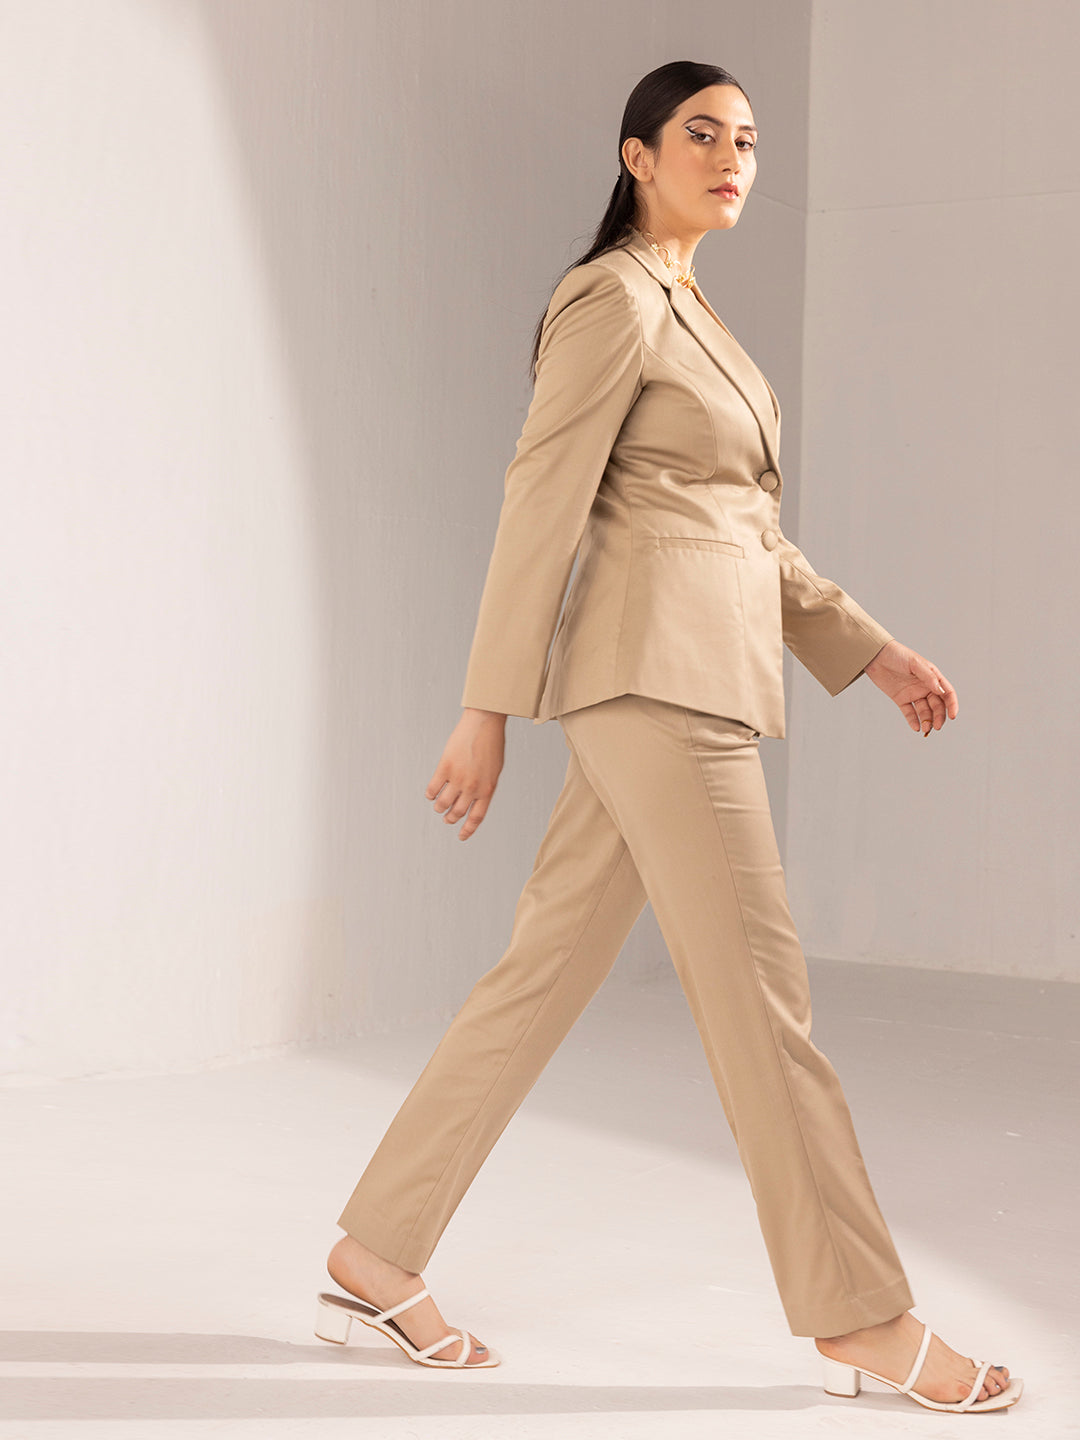 Discover more than 148 beige suit womens